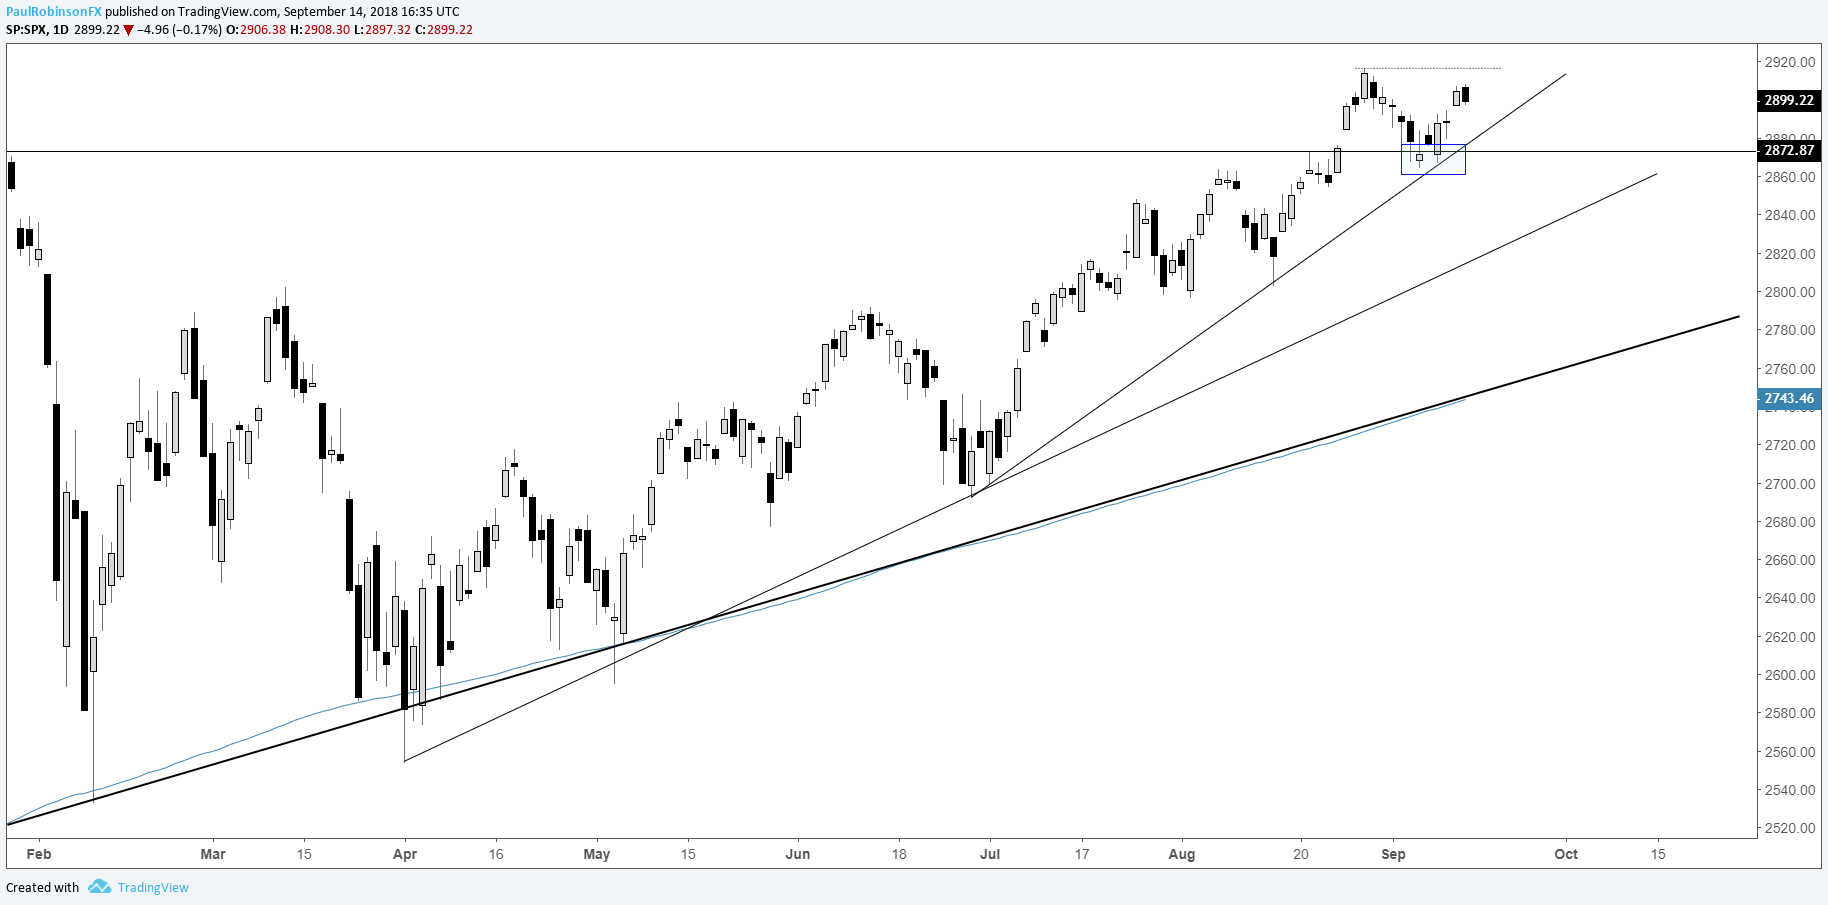 S&P 500 Maintains Solid Trend, Can the DAX and FTSE Follow Higher?